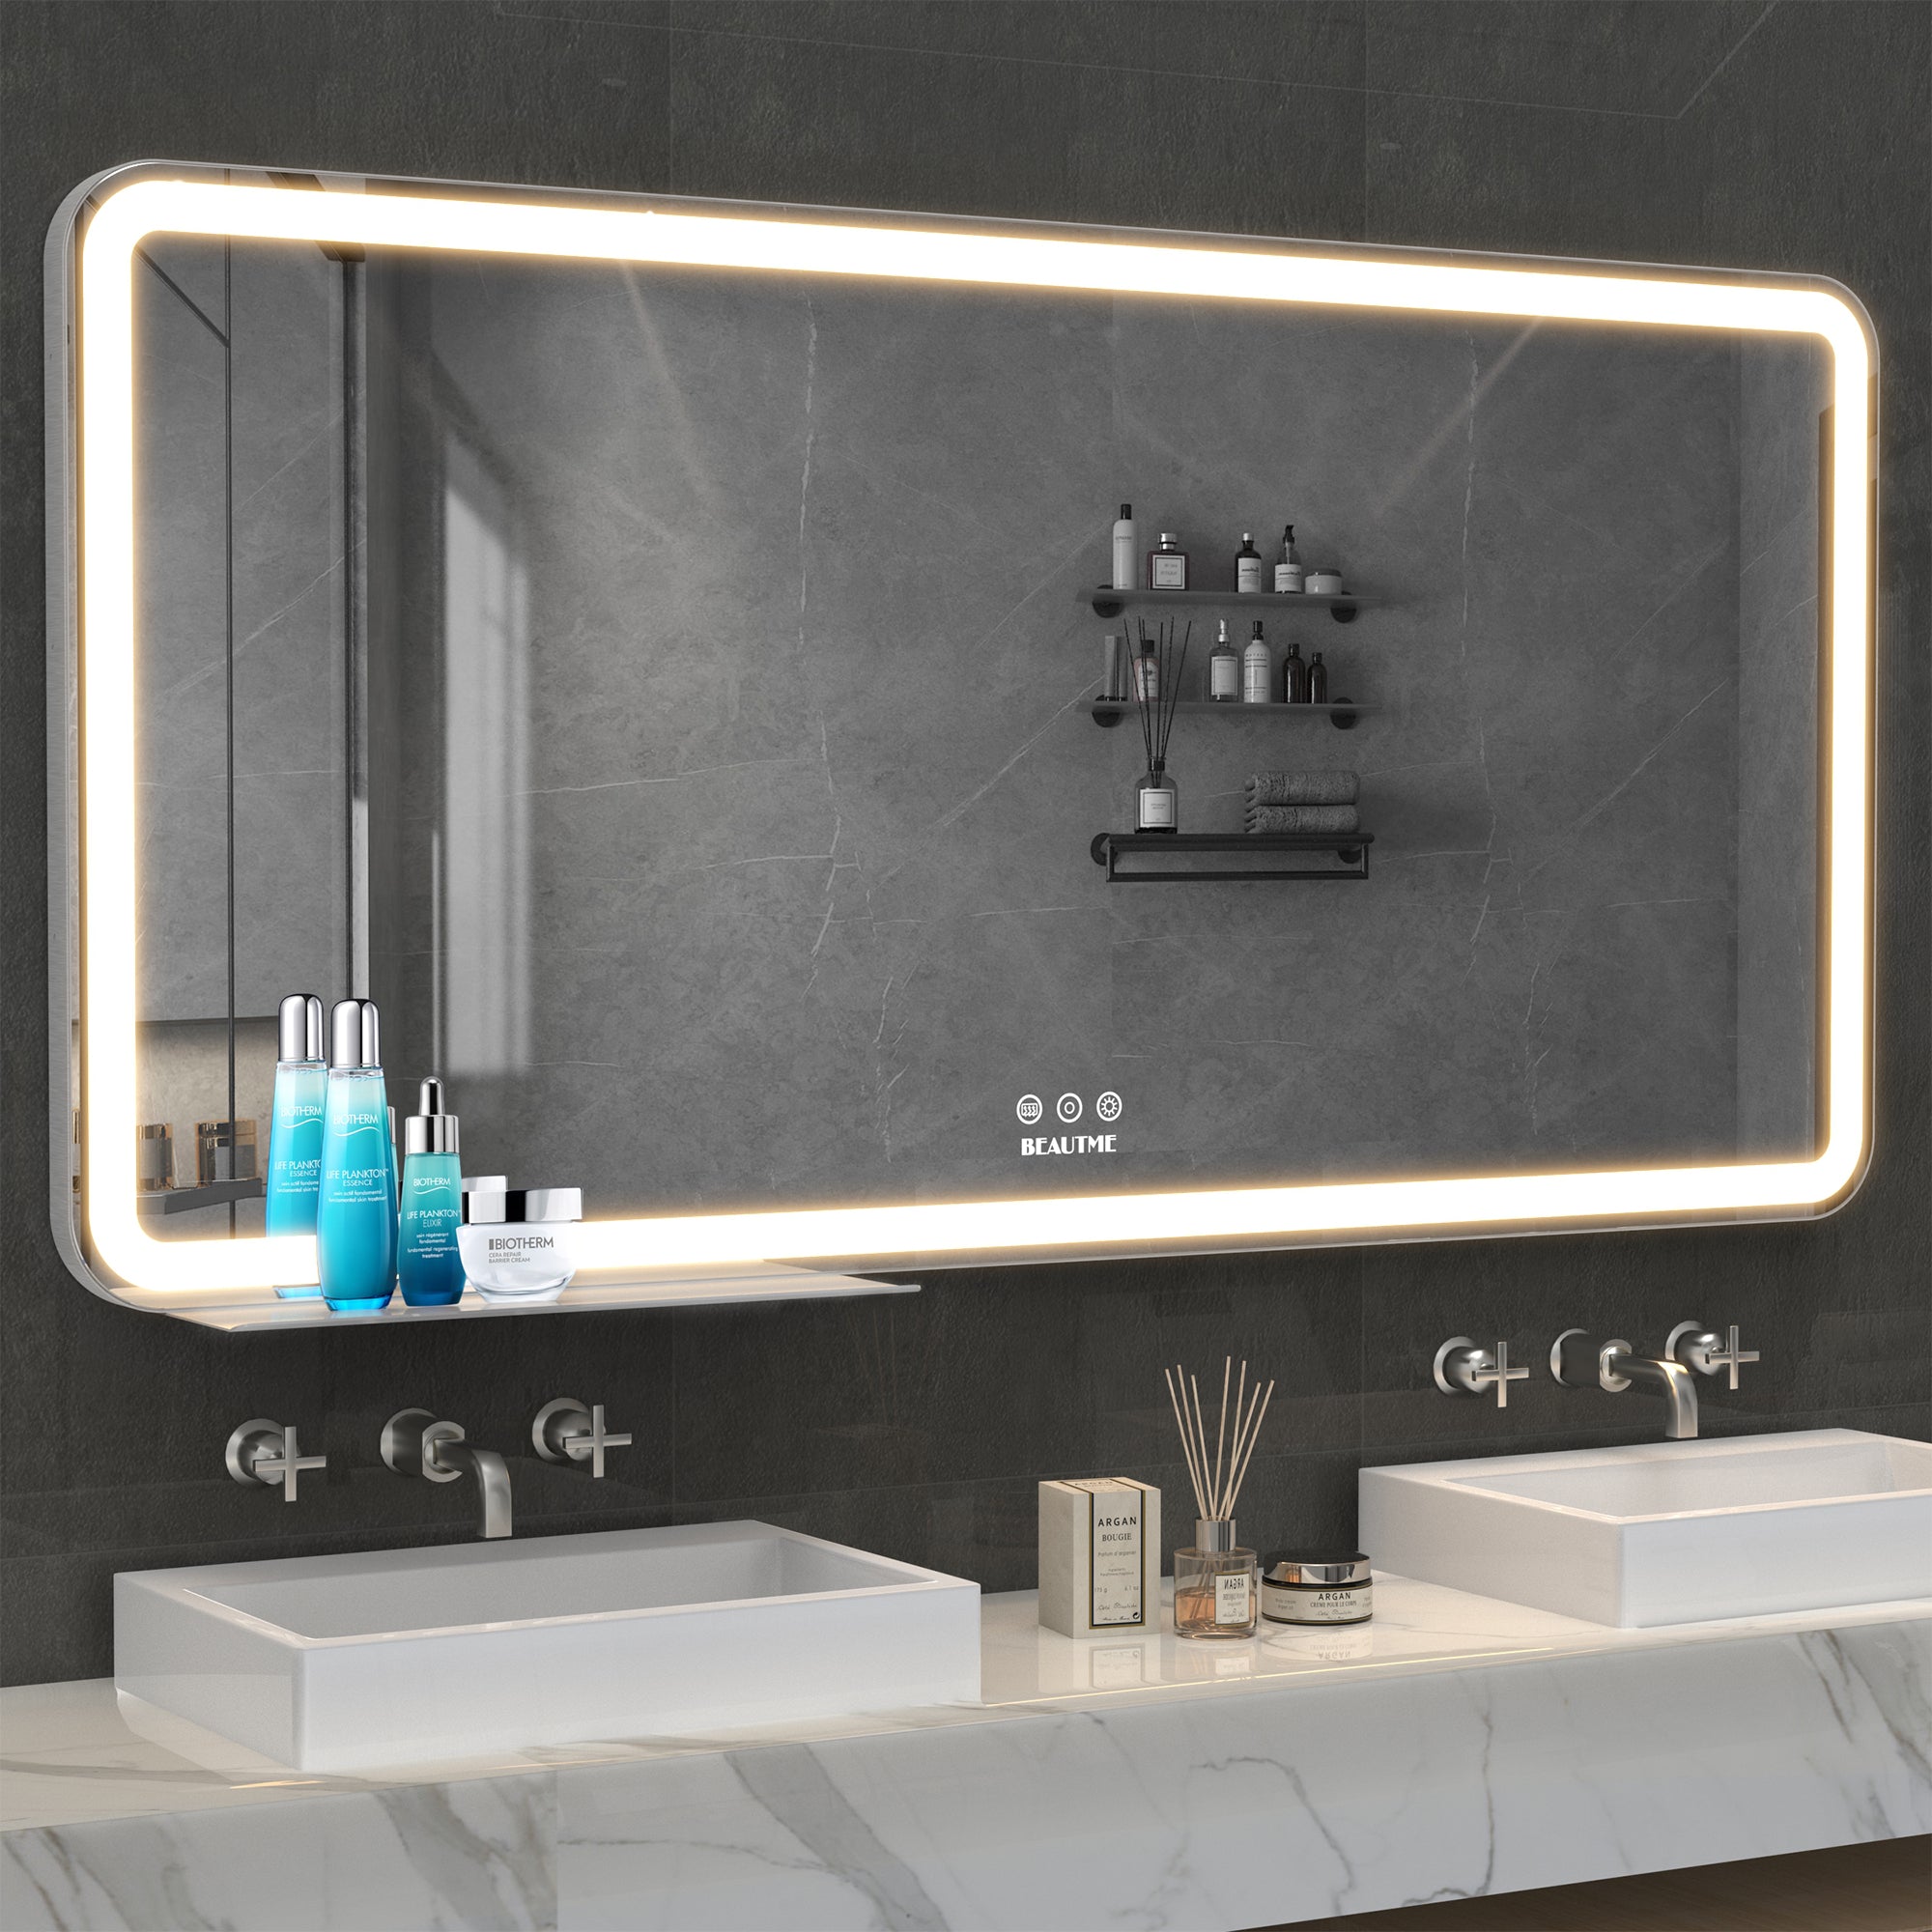 LED Bathroom Vanity Mirror Adjustable White/Warm/Natural Lights Anti-Fog Touch Switch with Memory With Storage Tray.